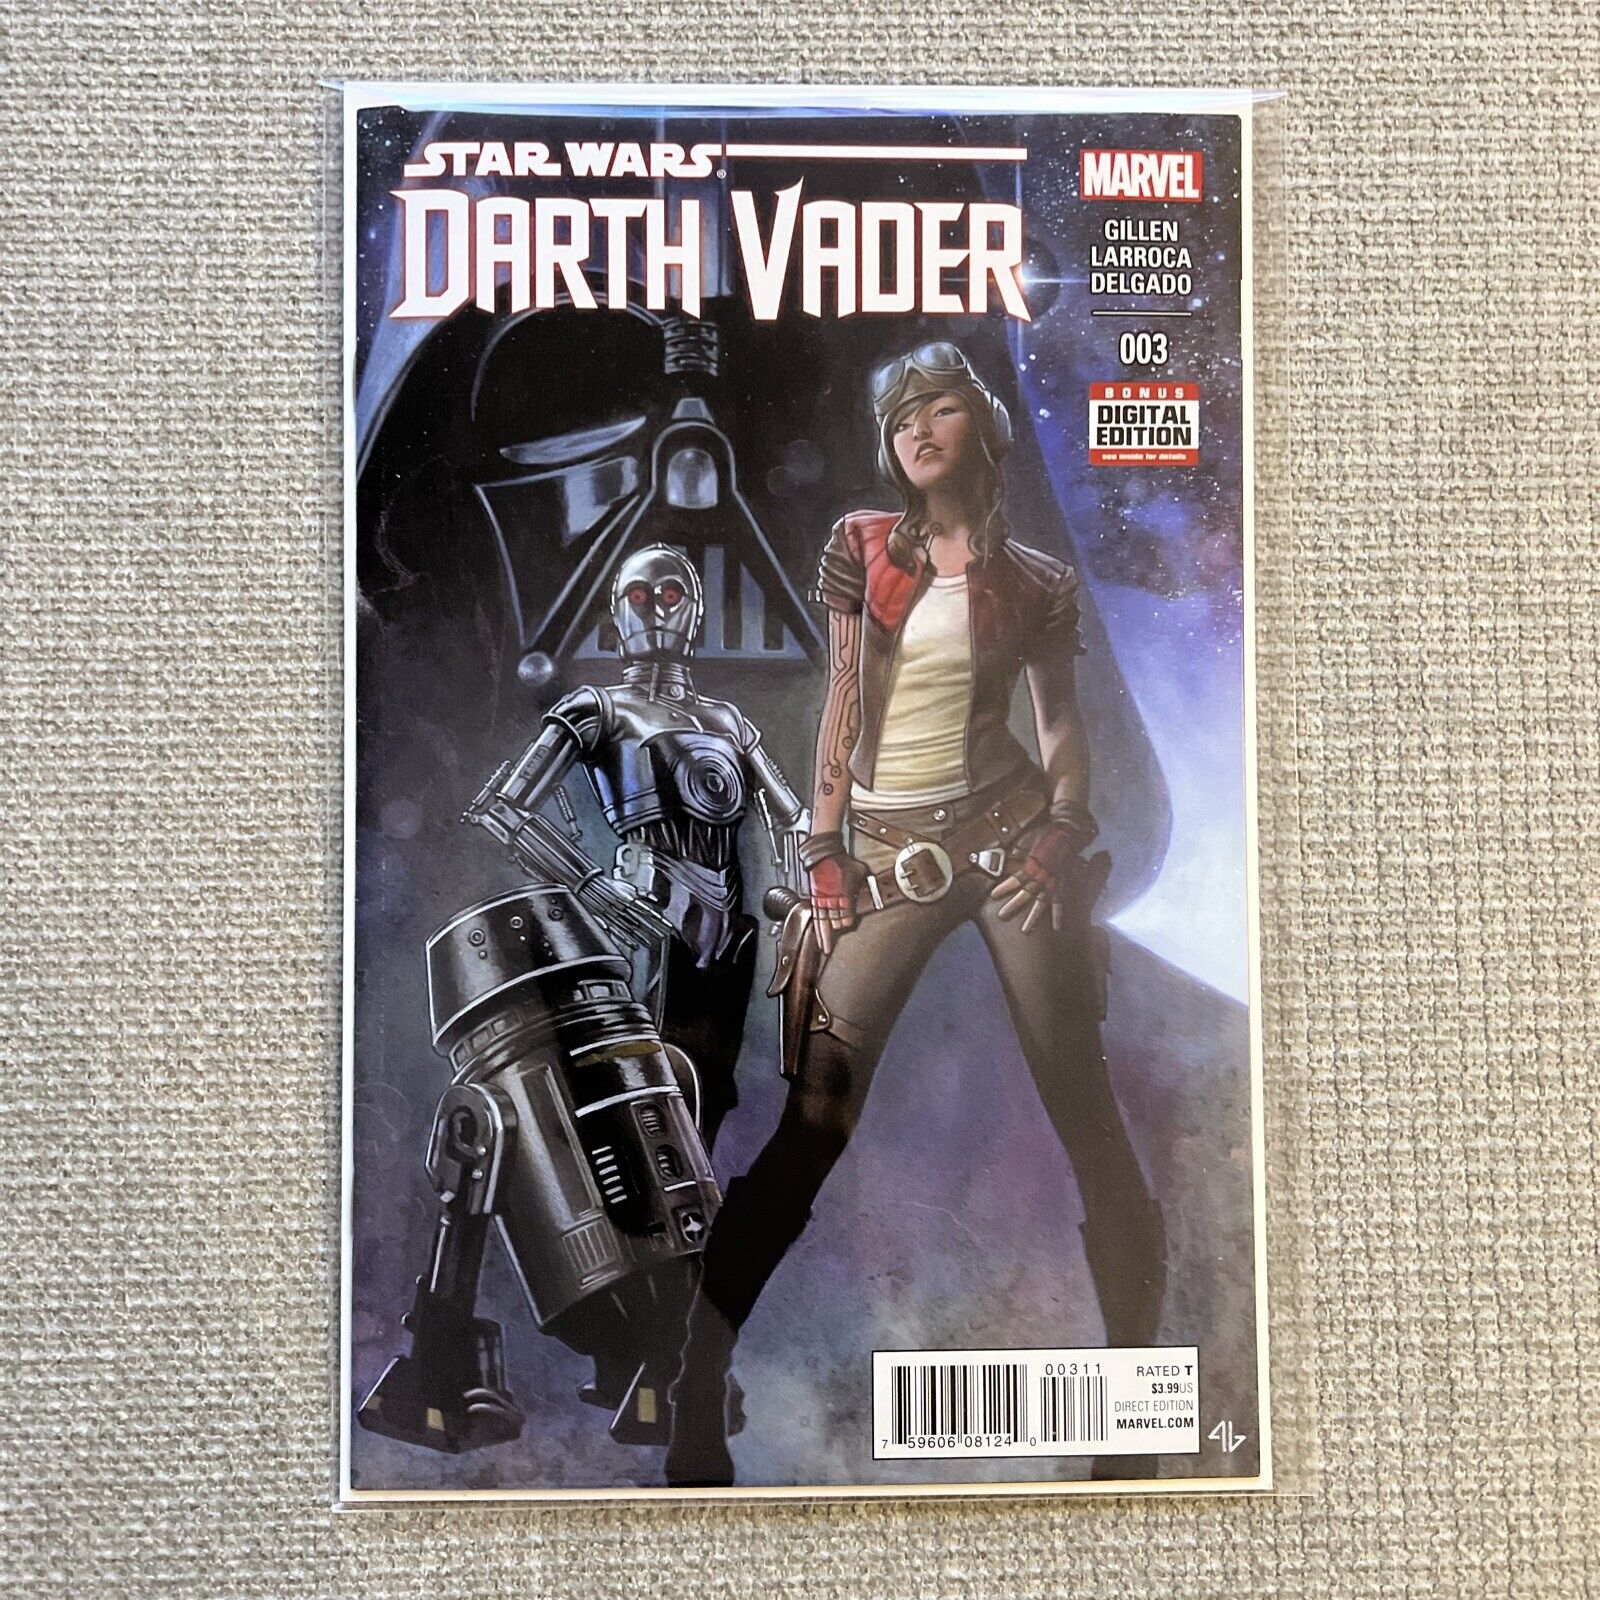 Darth Vader #3 (Marvel, May 2015) - 1st Appearance of Dr. Aphra, Key